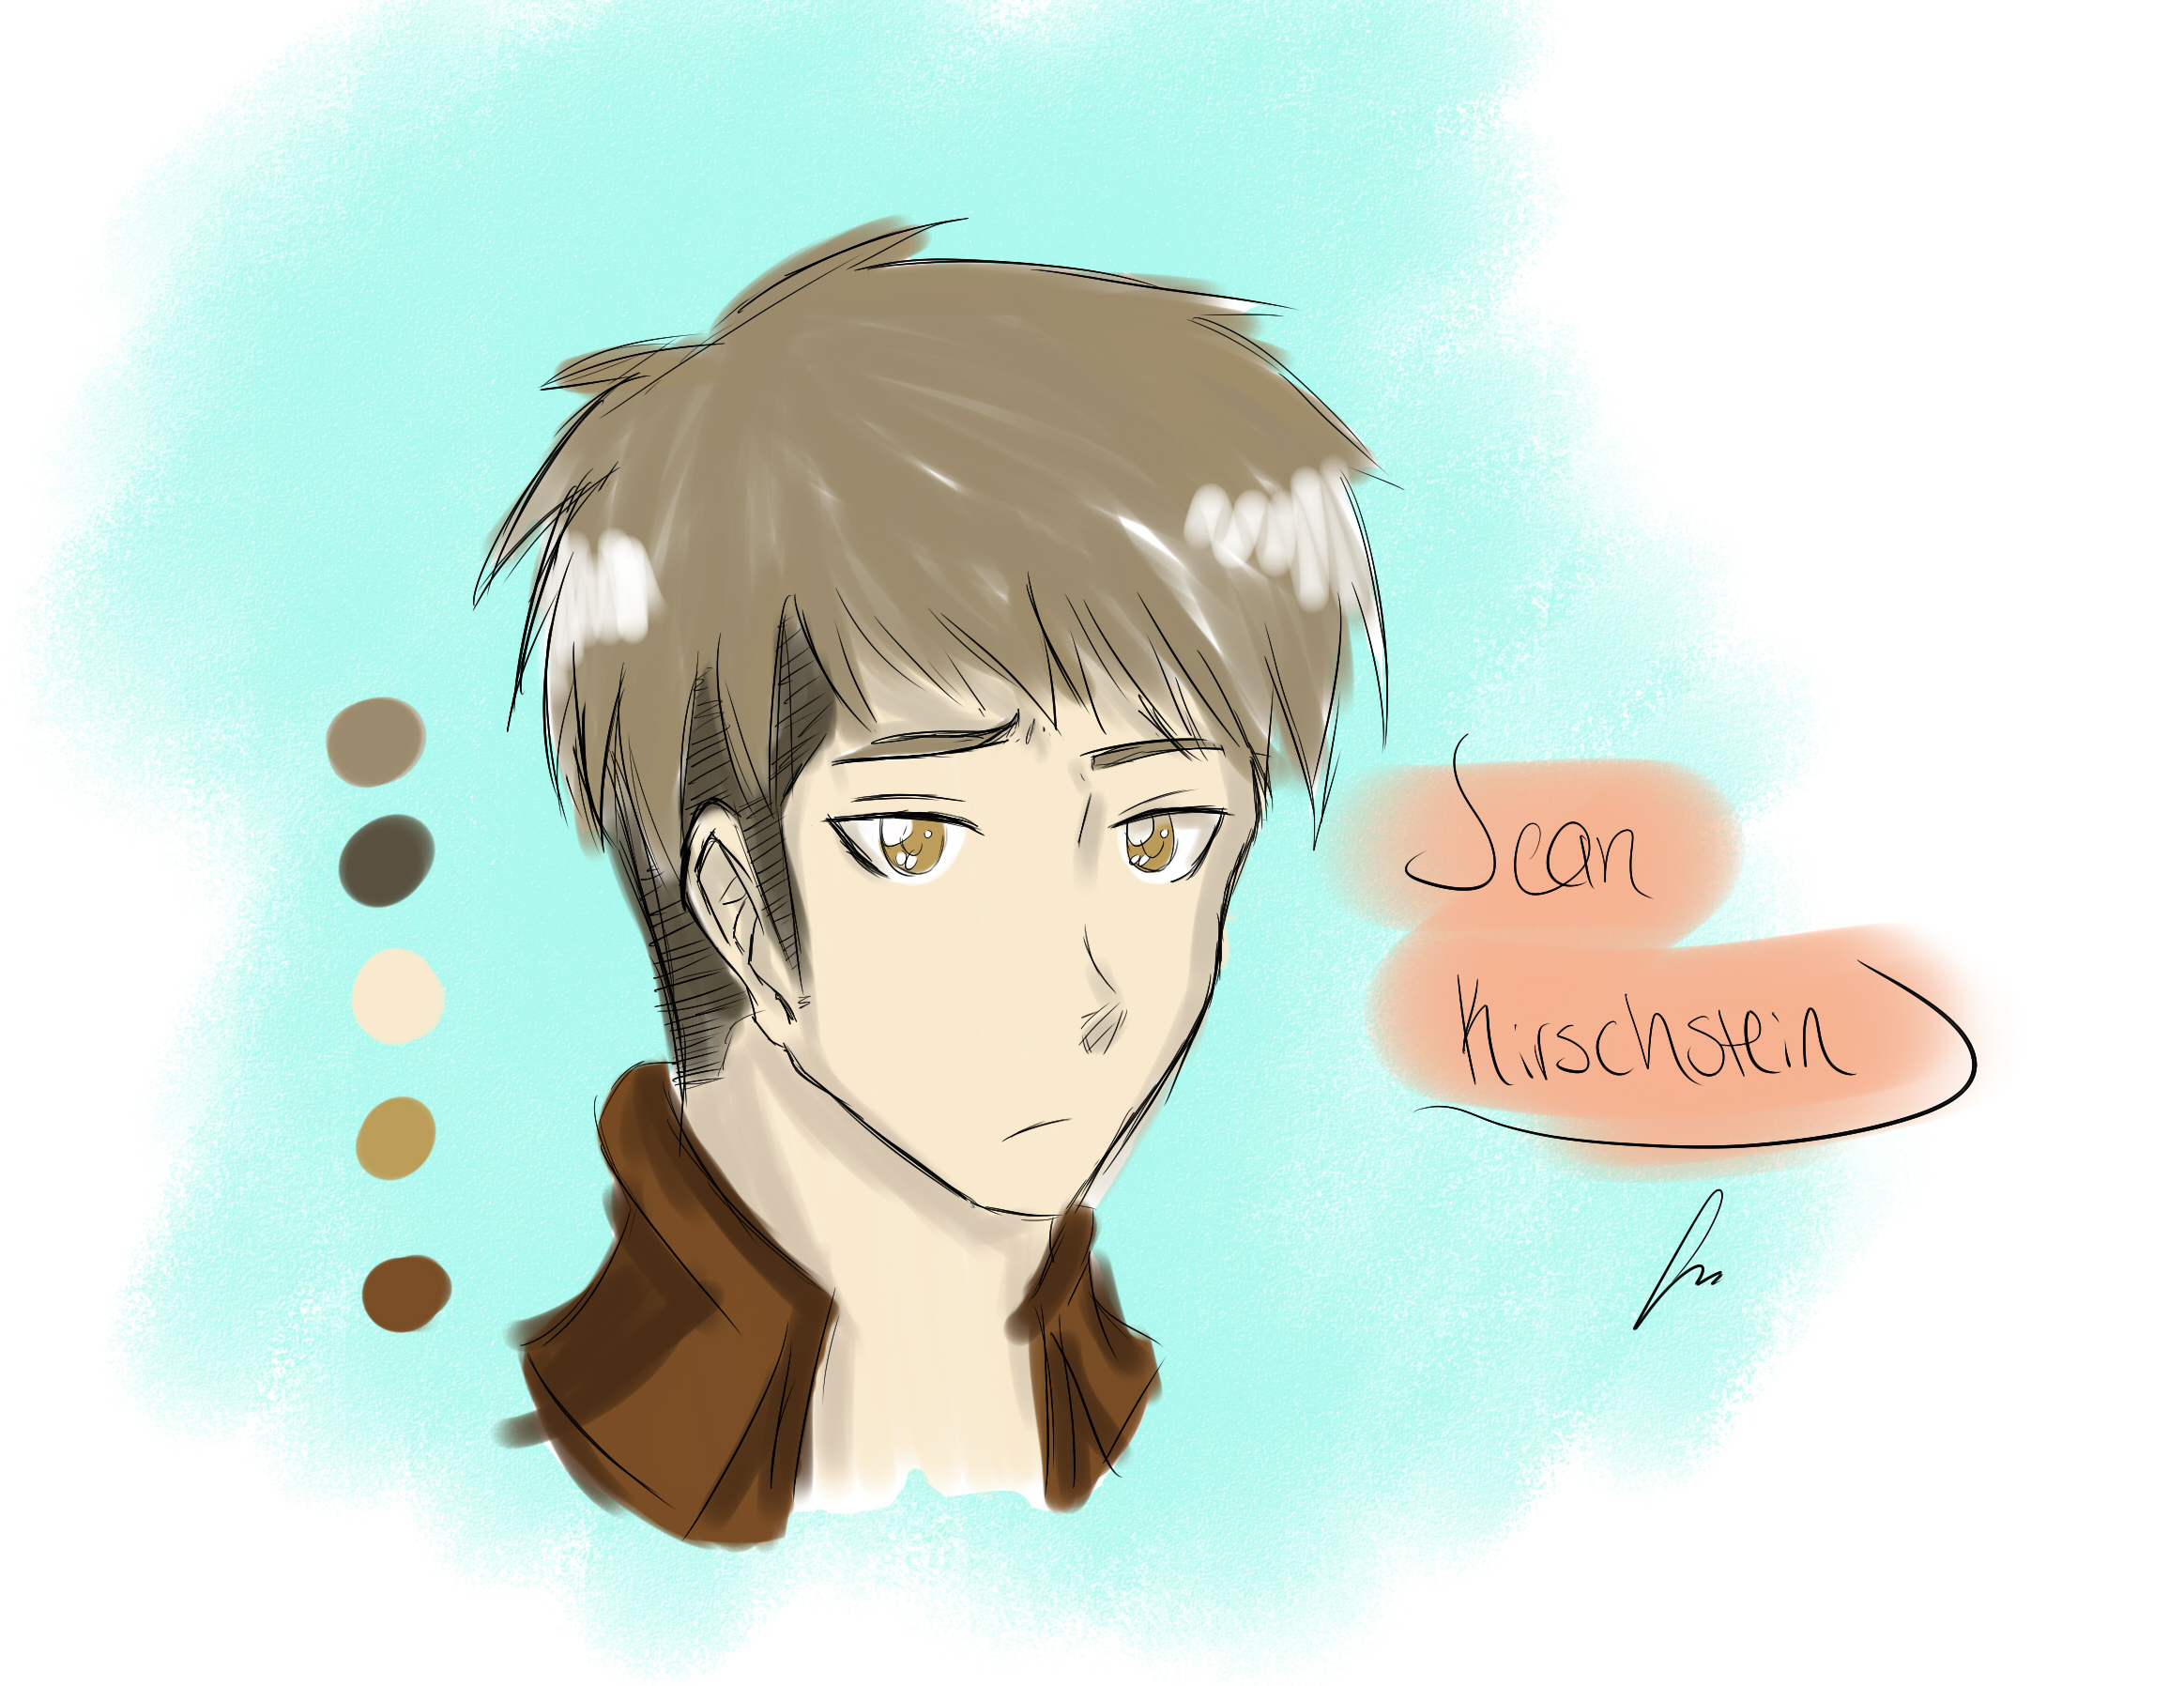 new style jean i guess by MackleSmack